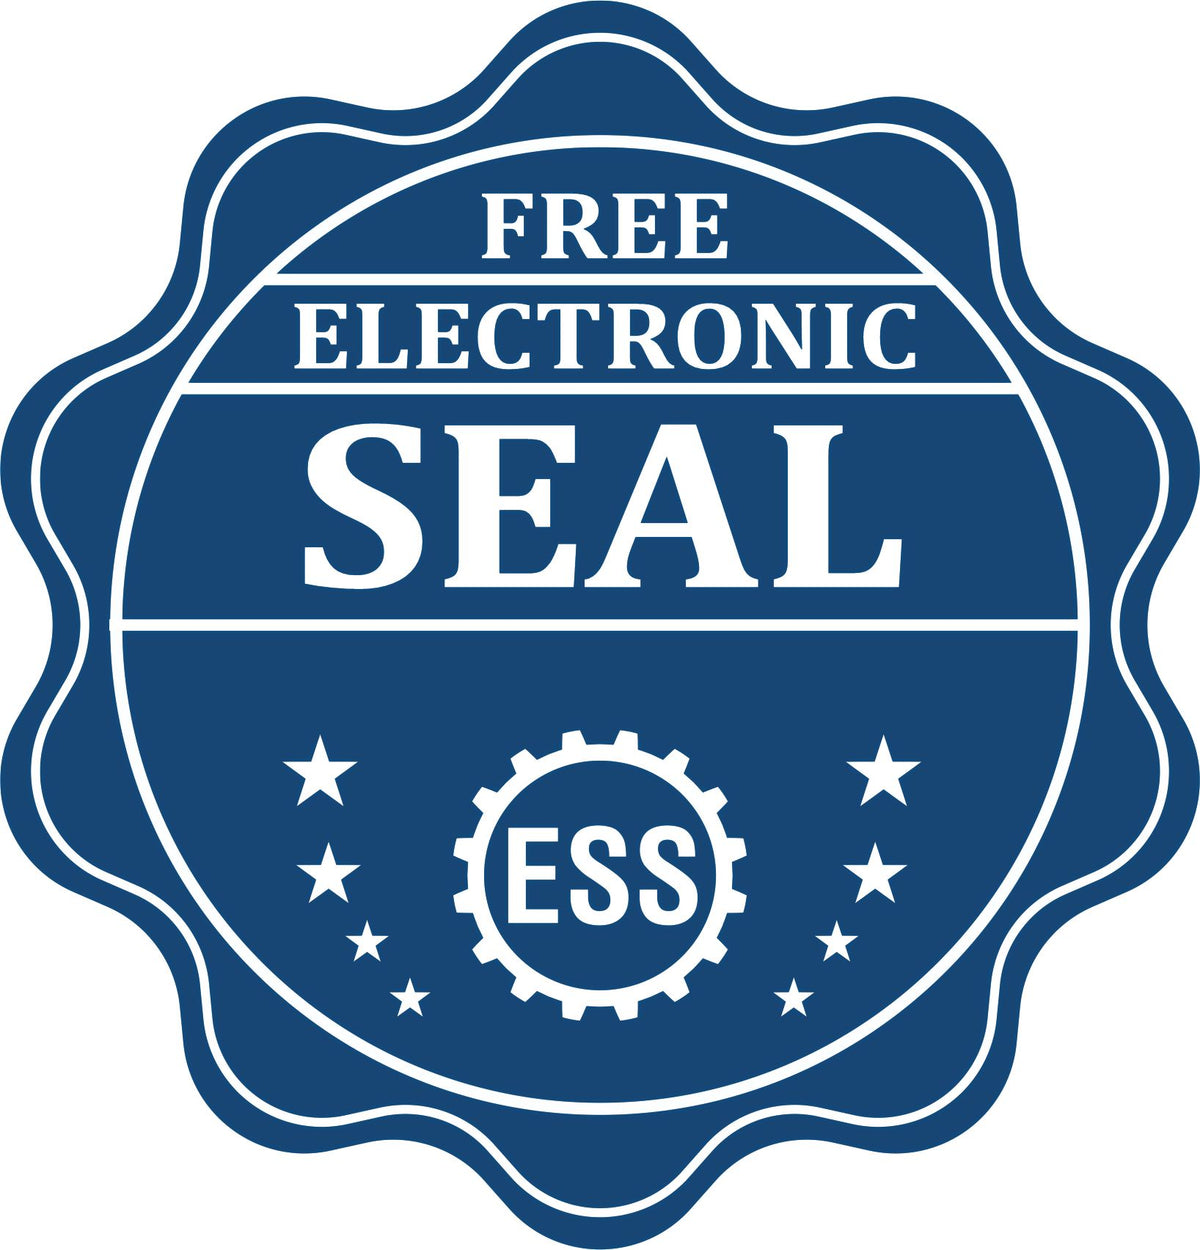 A badge showing a free electronic seal for the Heavy Duty Cast Iron South Dakota Engineer Seal Embosser with stars and the ESS gear on the emblem.